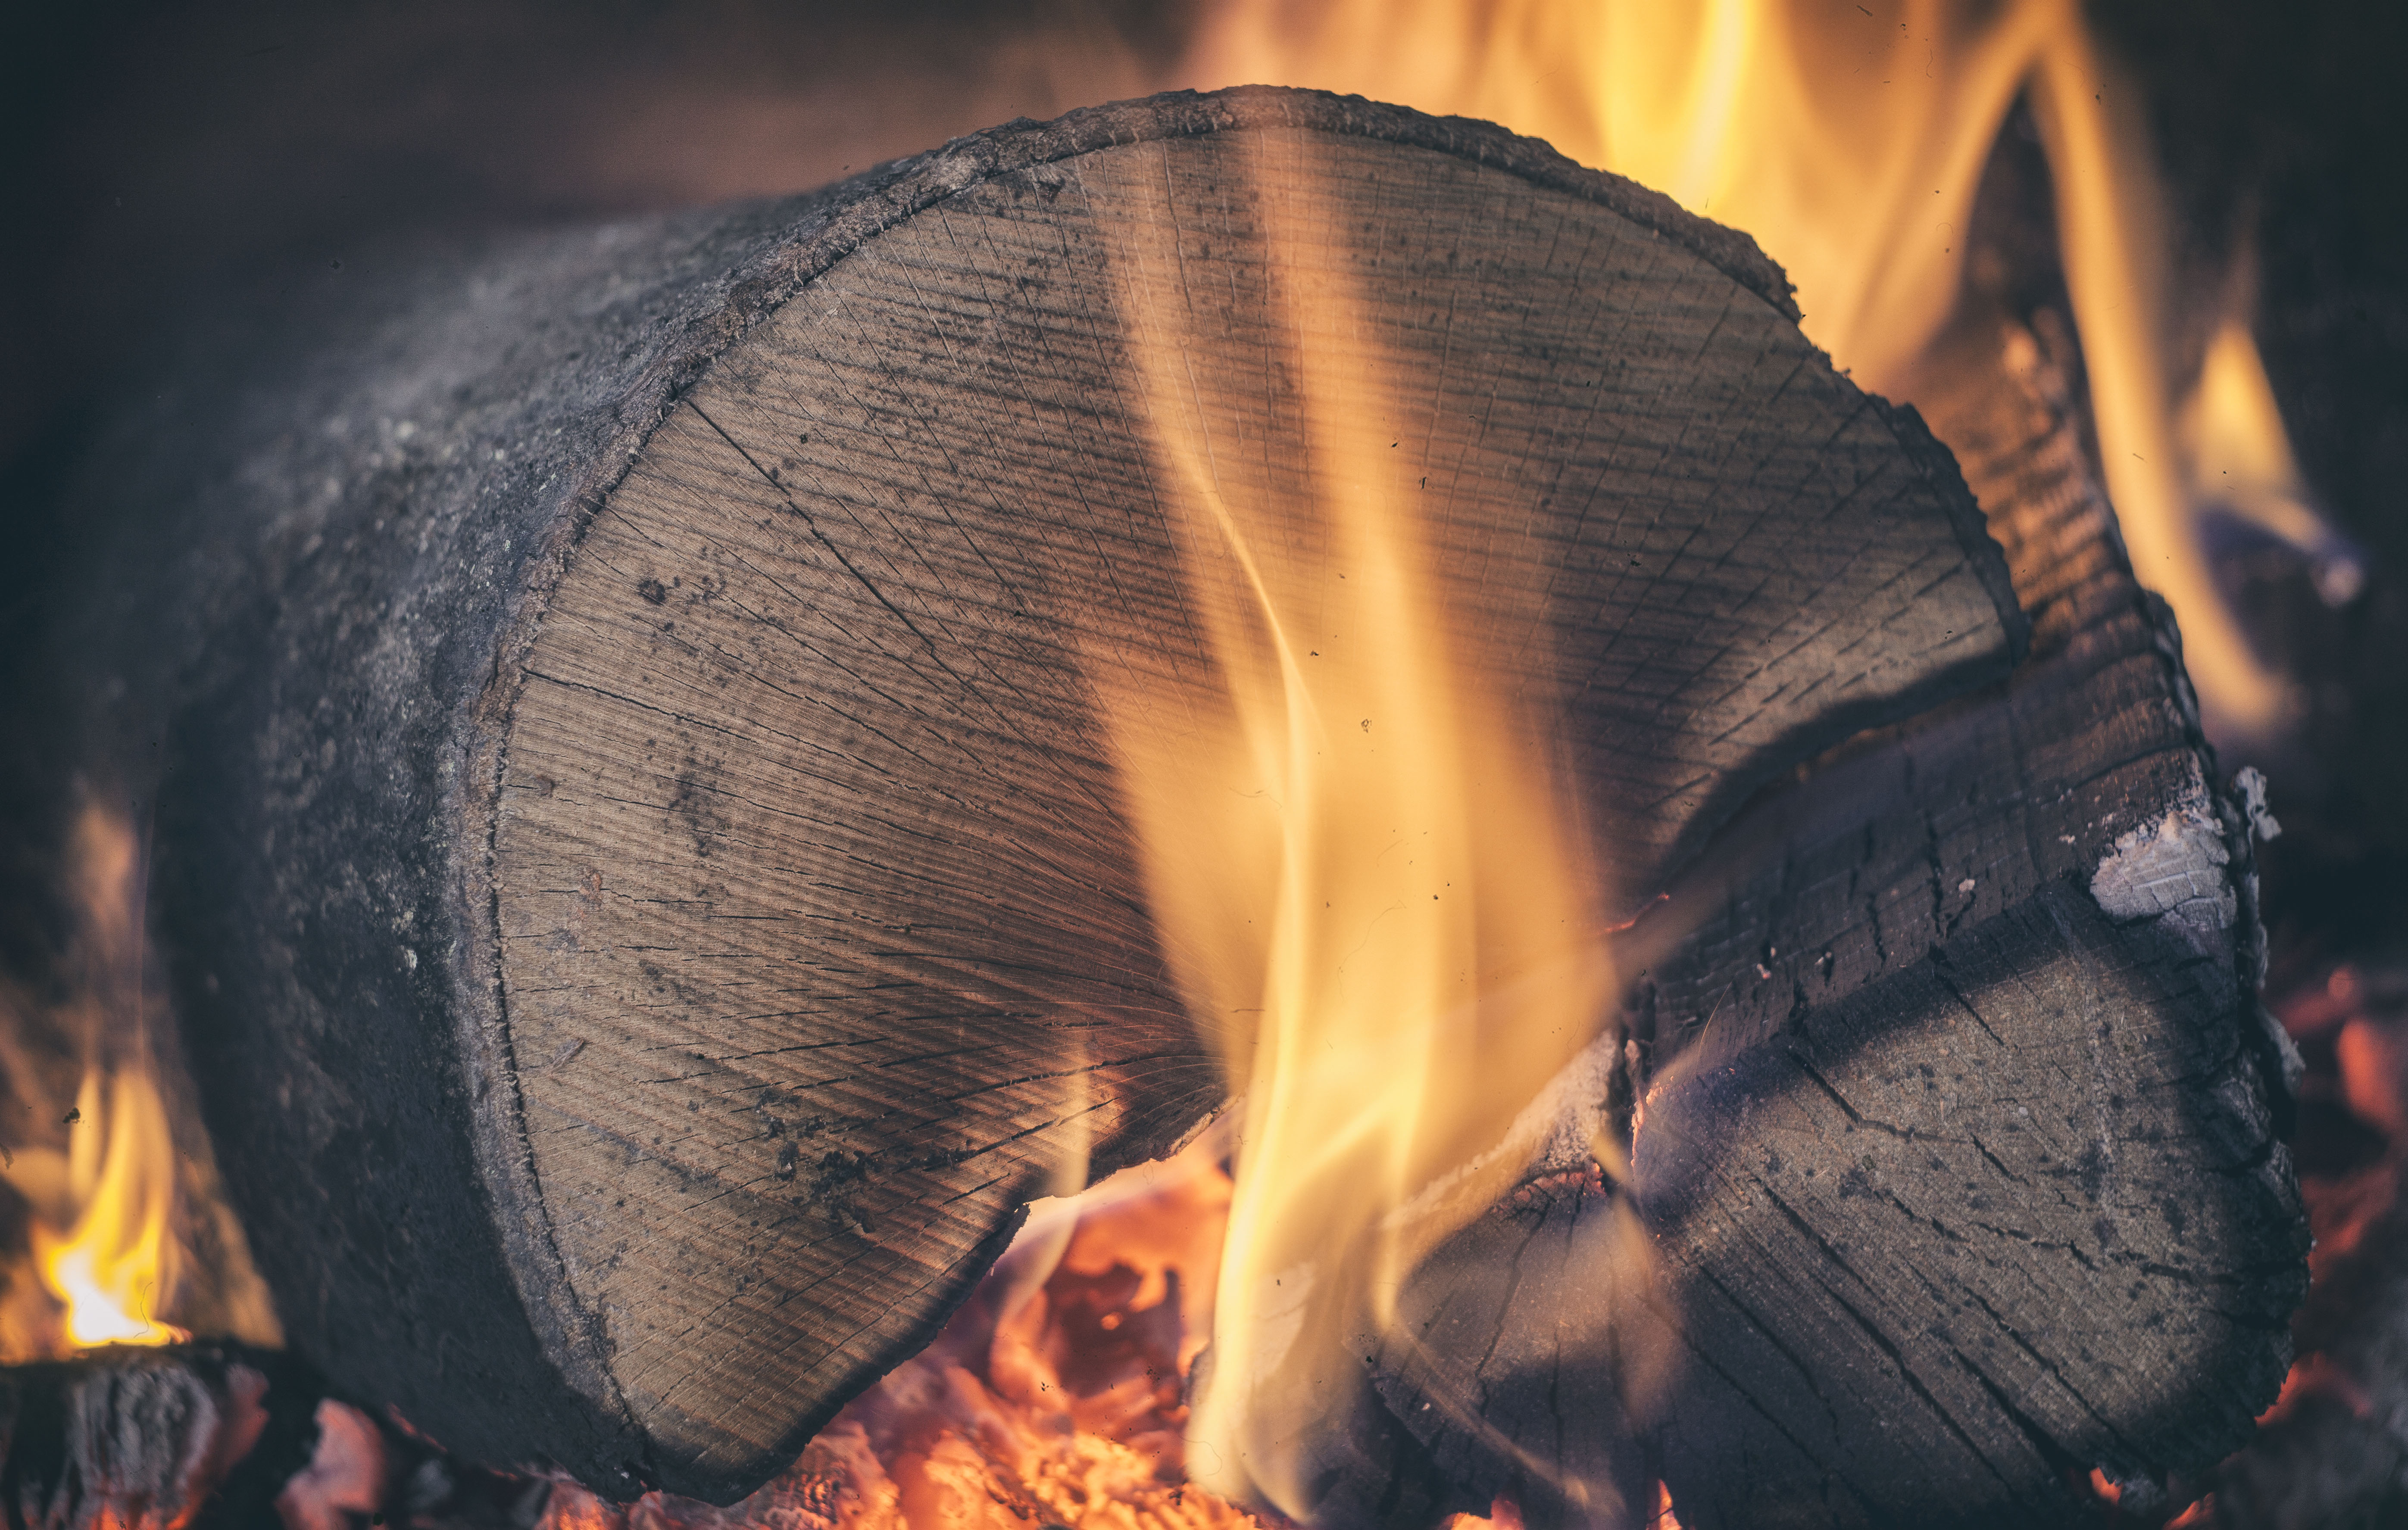 photography, fire, flame, log